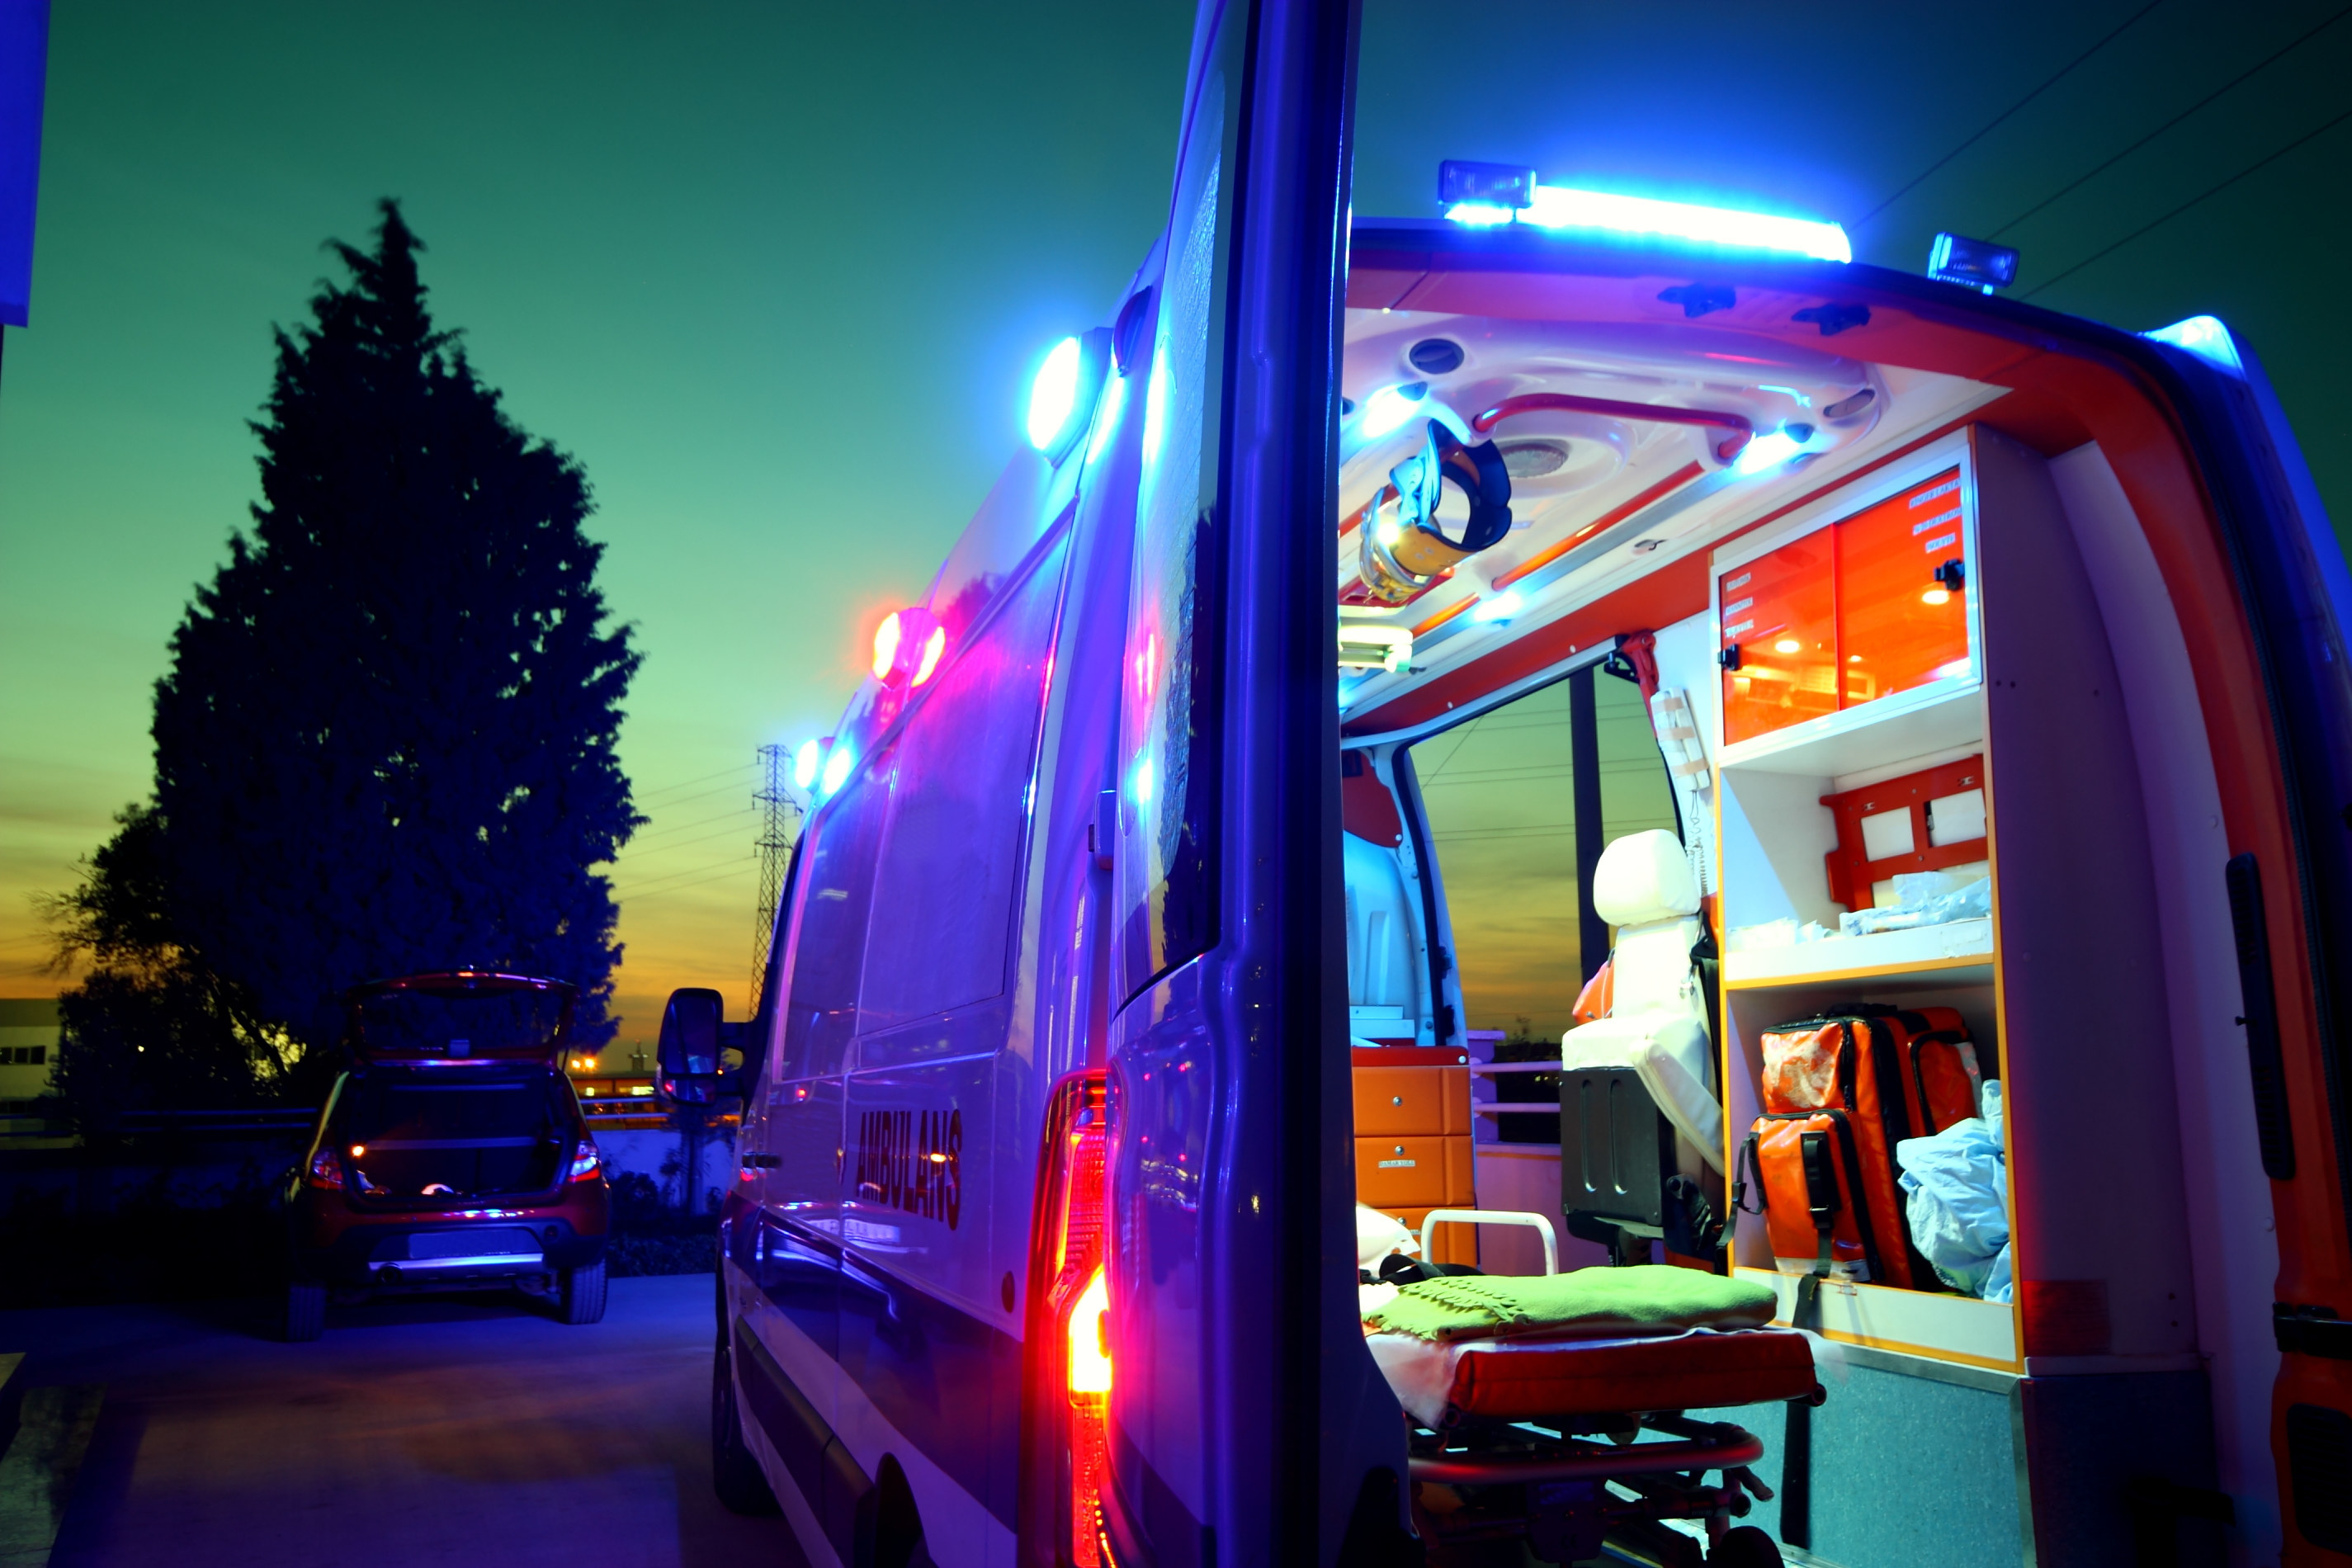 A stock image of a parked ambulance with its back doors open